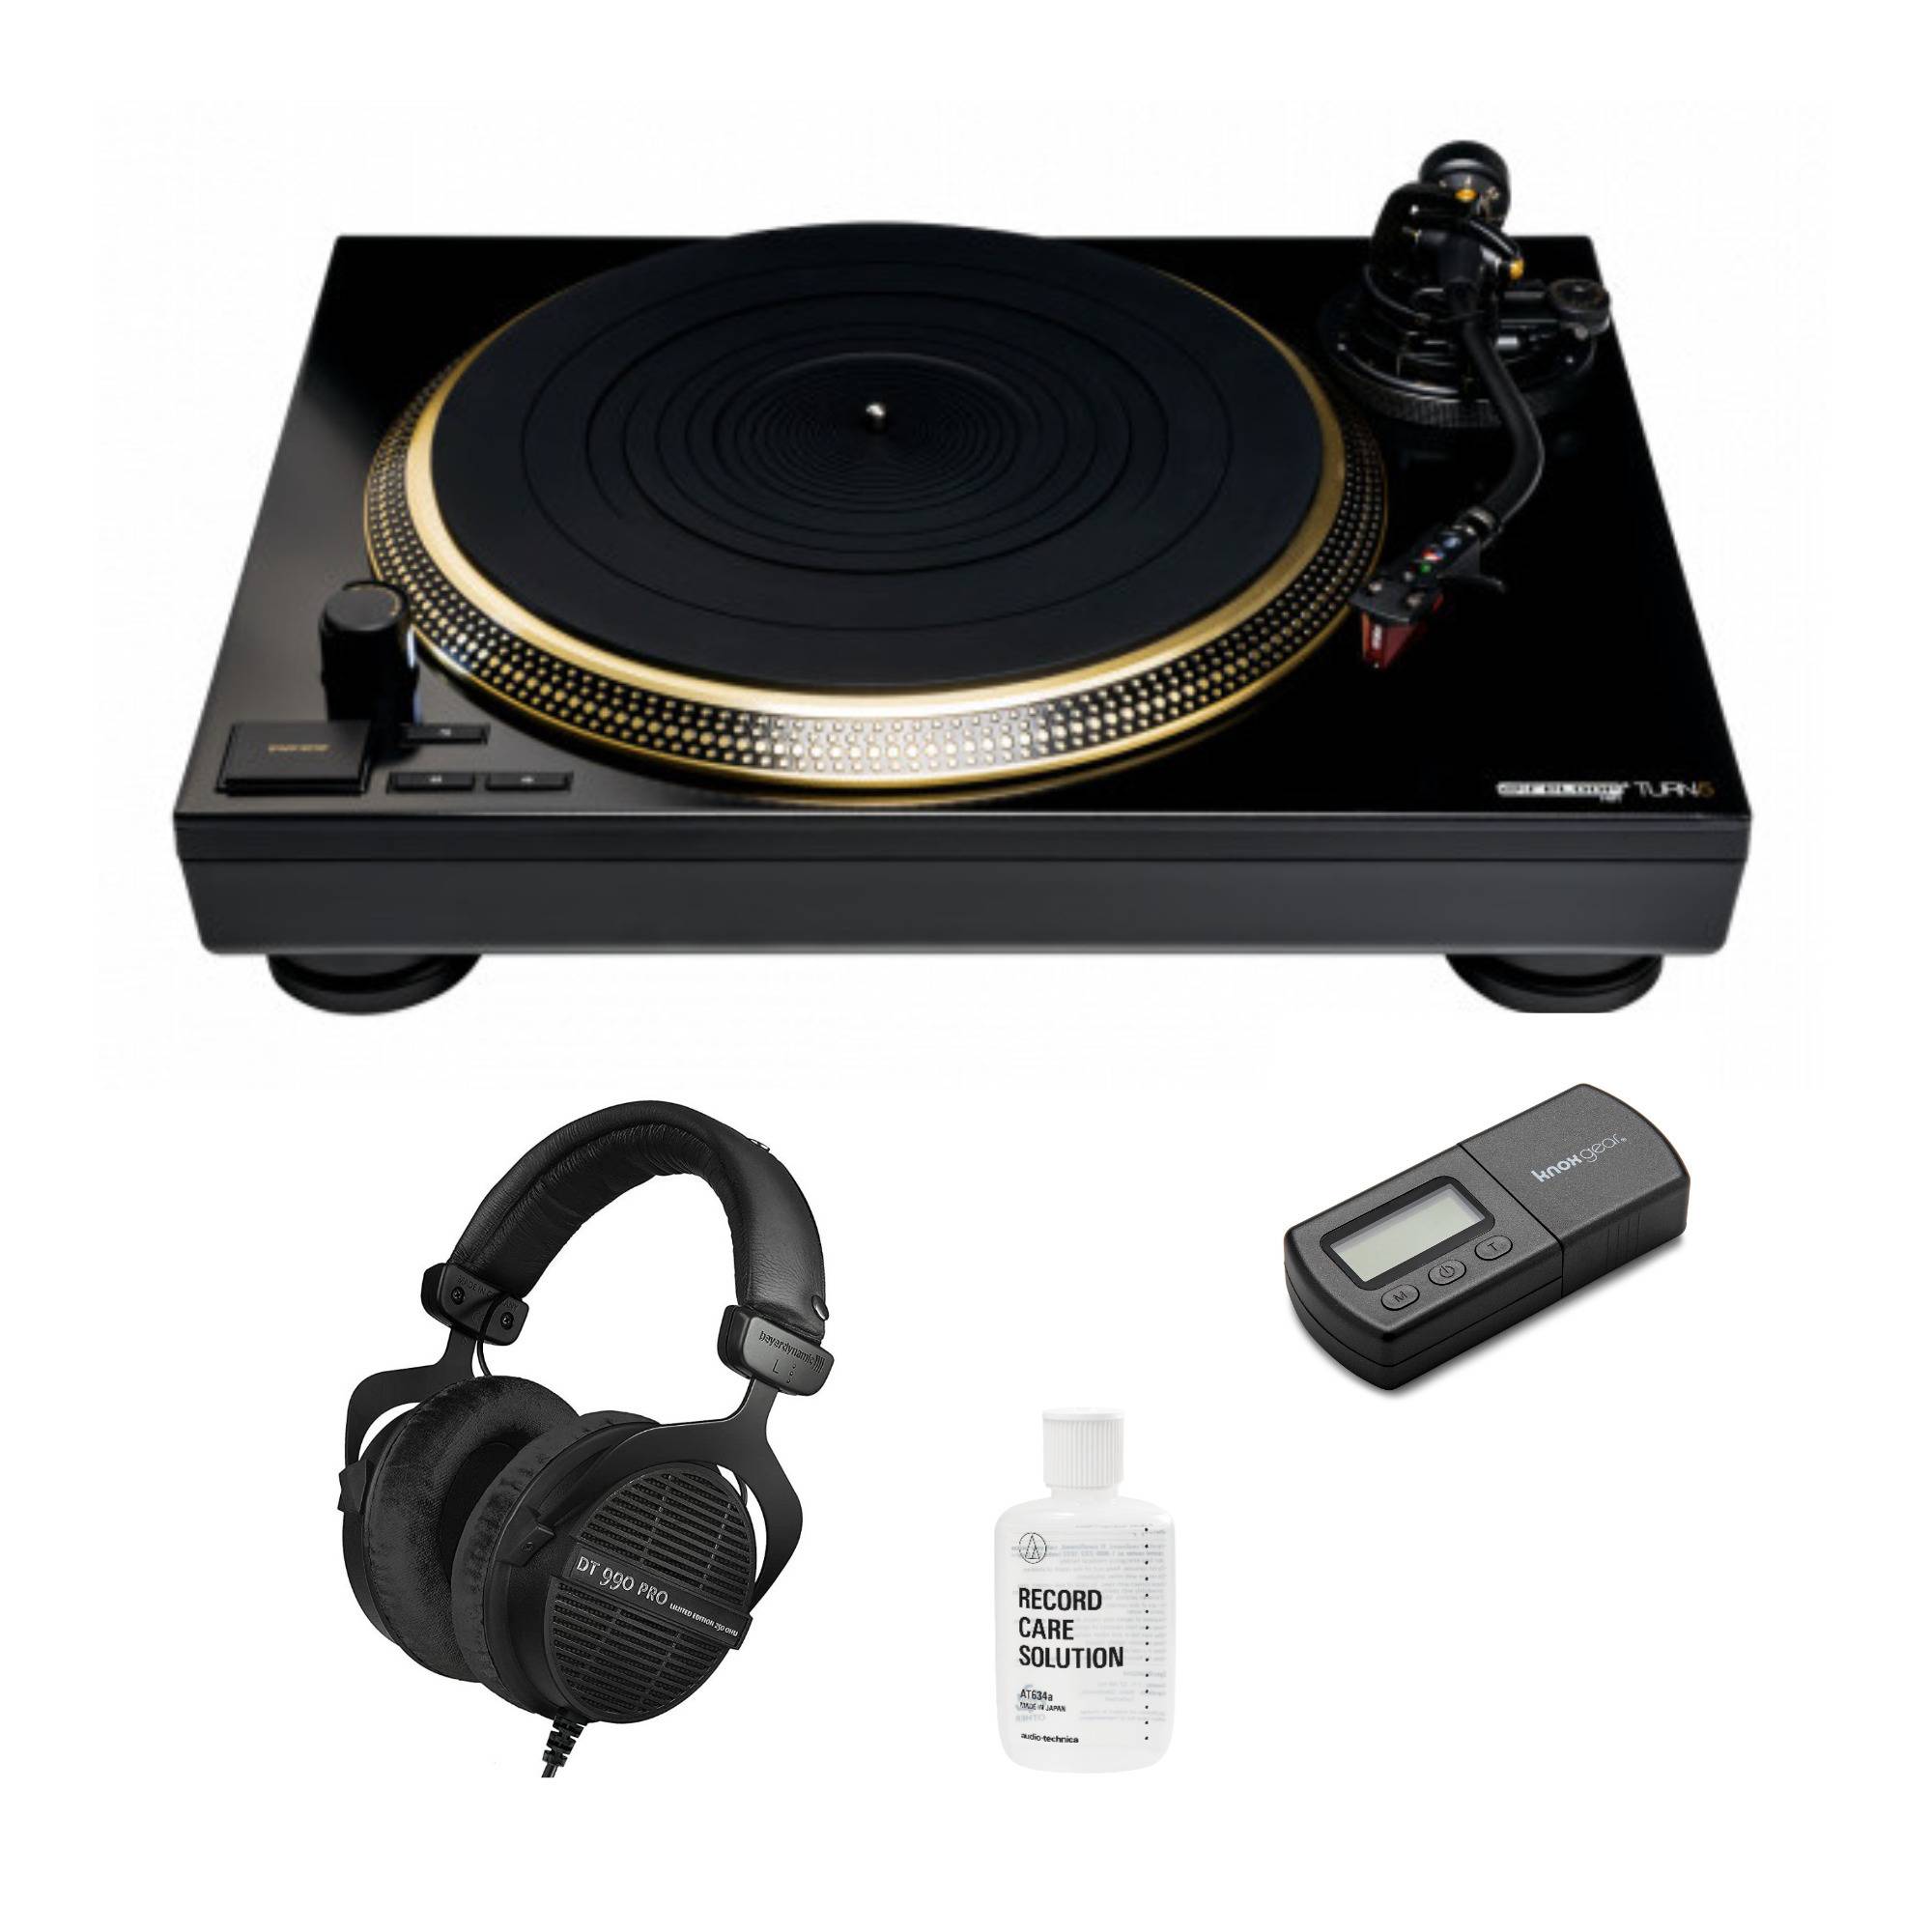 Reloop Turn 5 Direct Drive HiFi Turntable System with  Studio Headphones (Black) and Record Care Kit